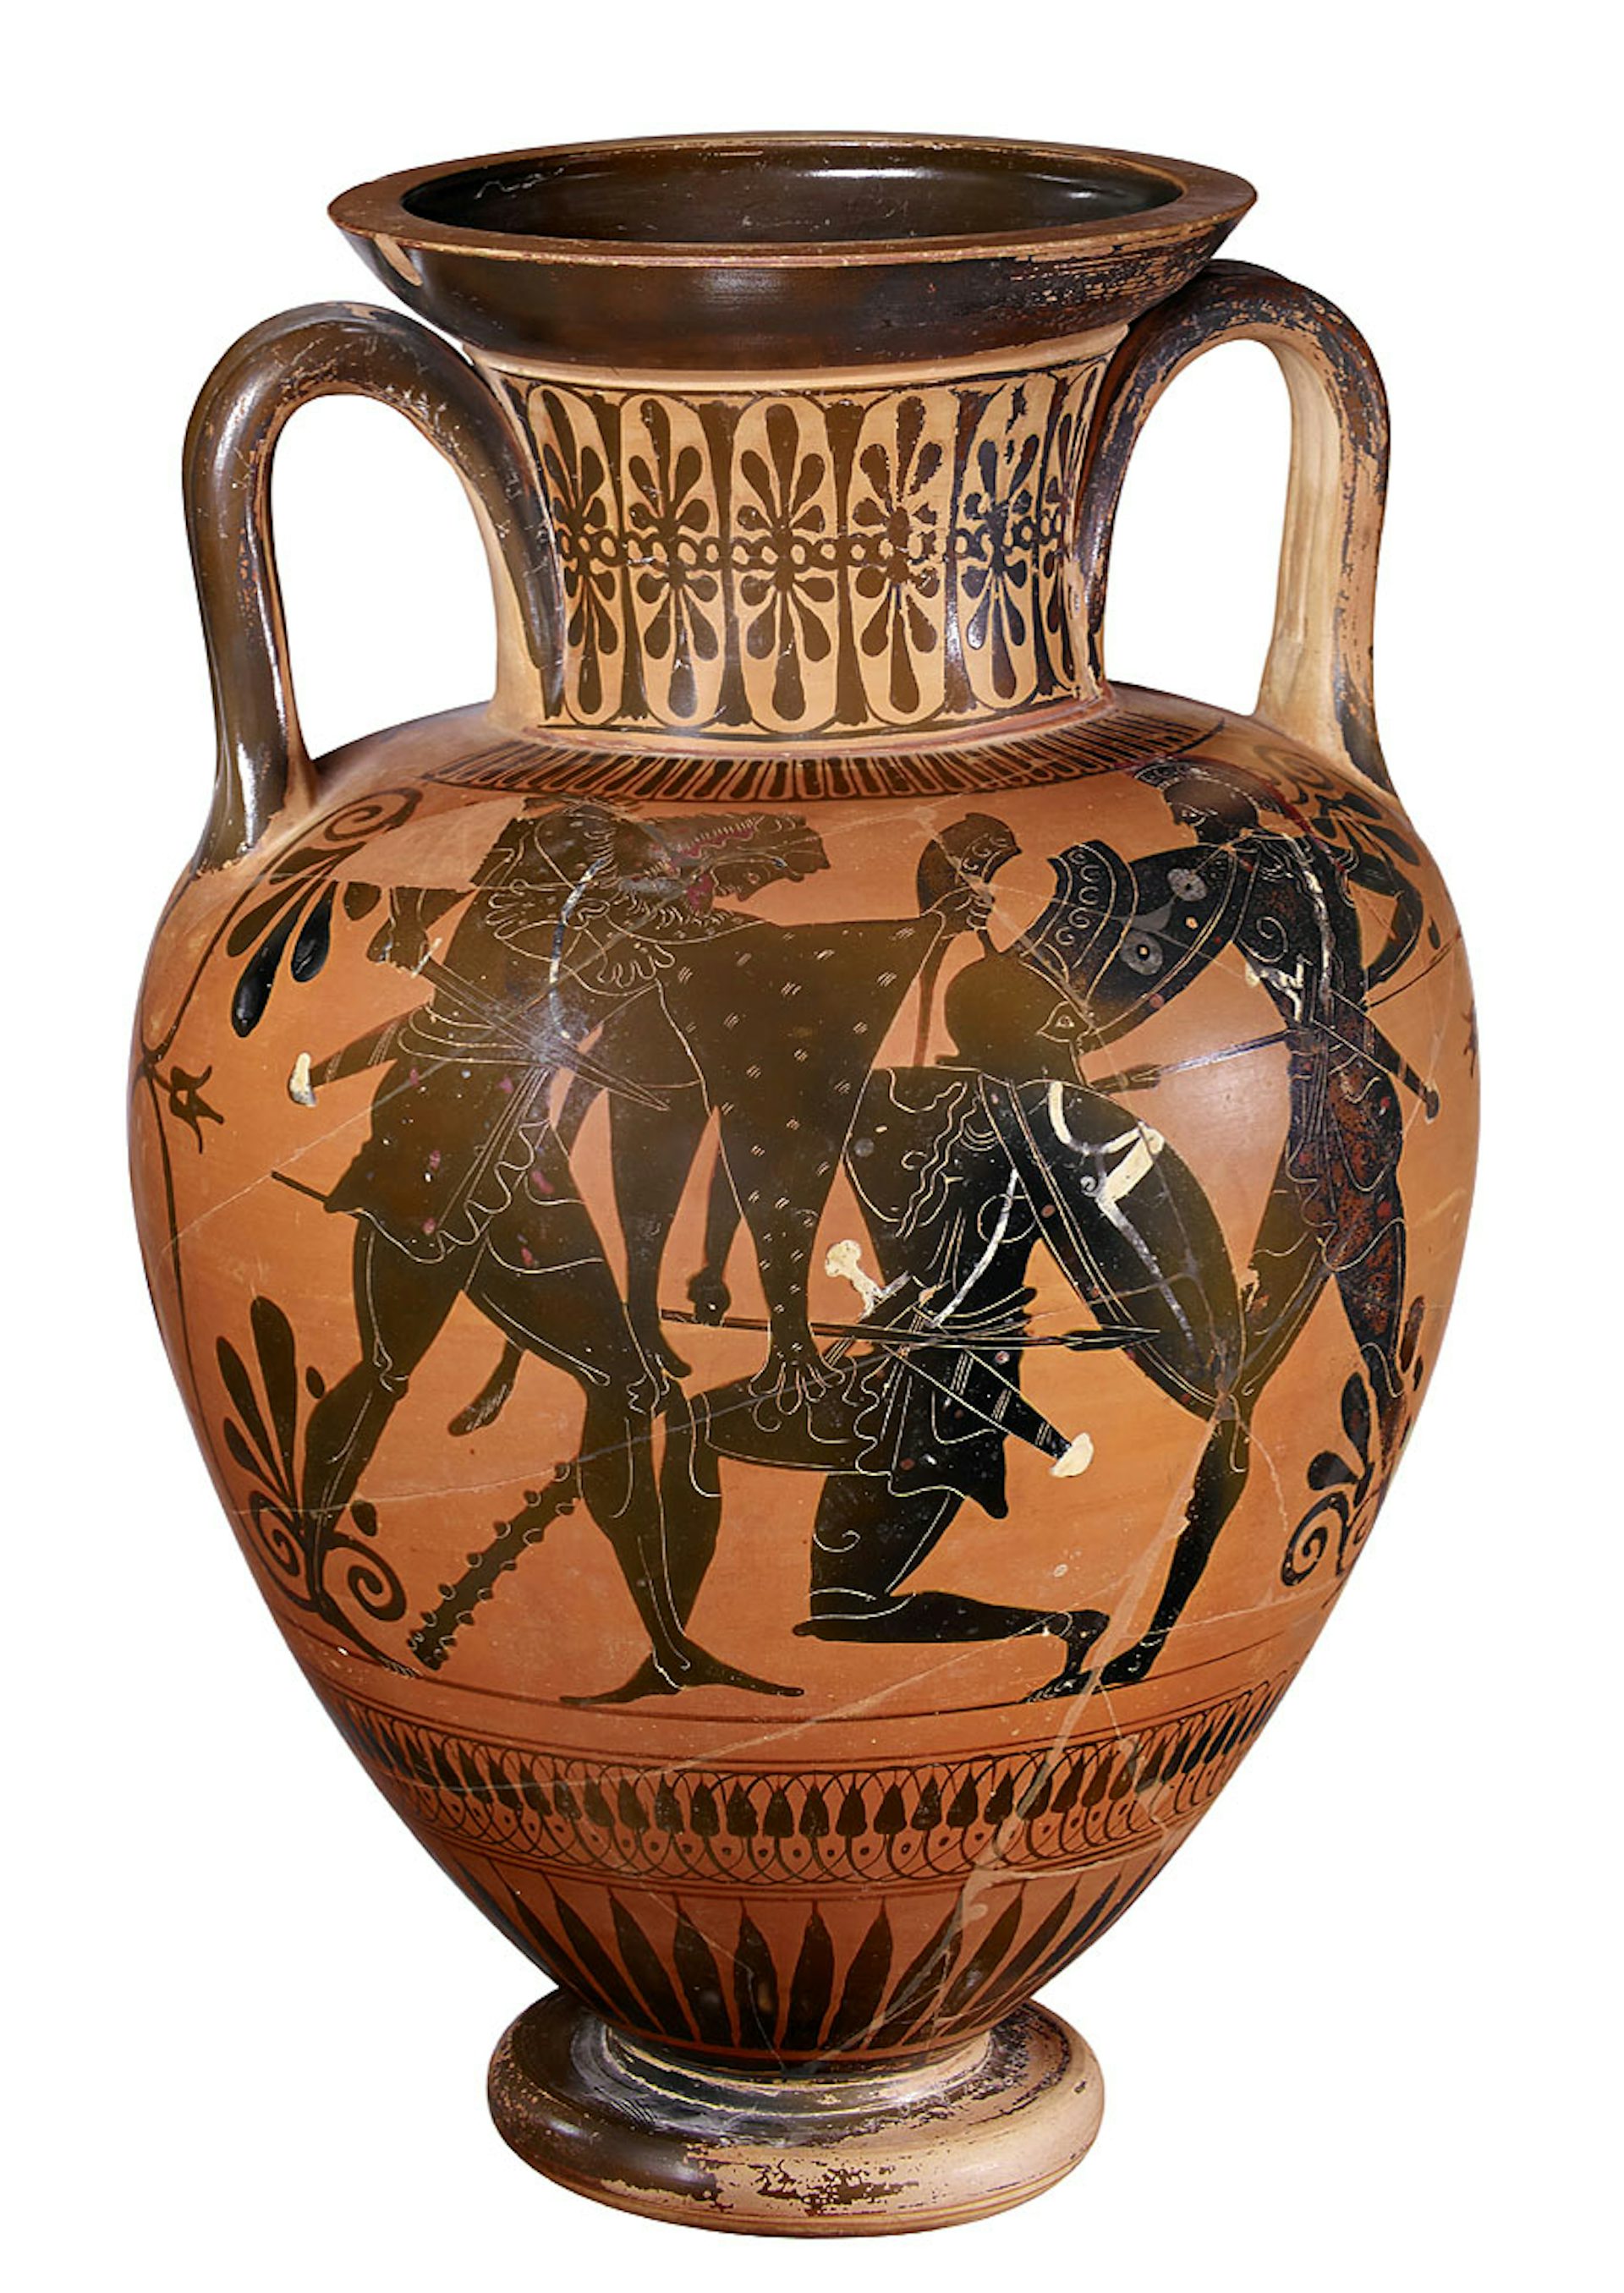 Vase painting of Heracles and Iolaus fighting Cycnus